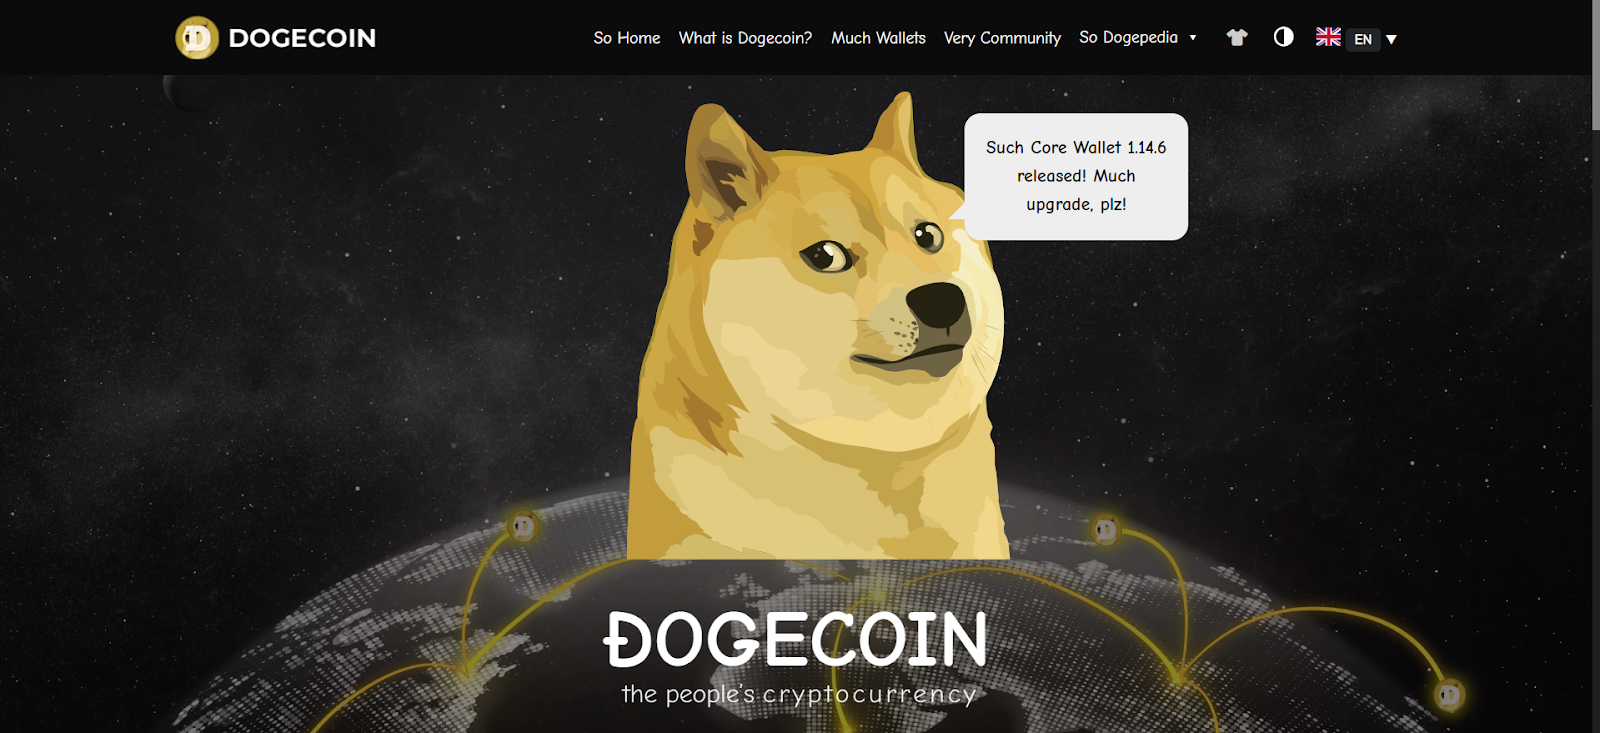 DOGE Crypto: Dogecoin's Role In the Crypto Currency Market 